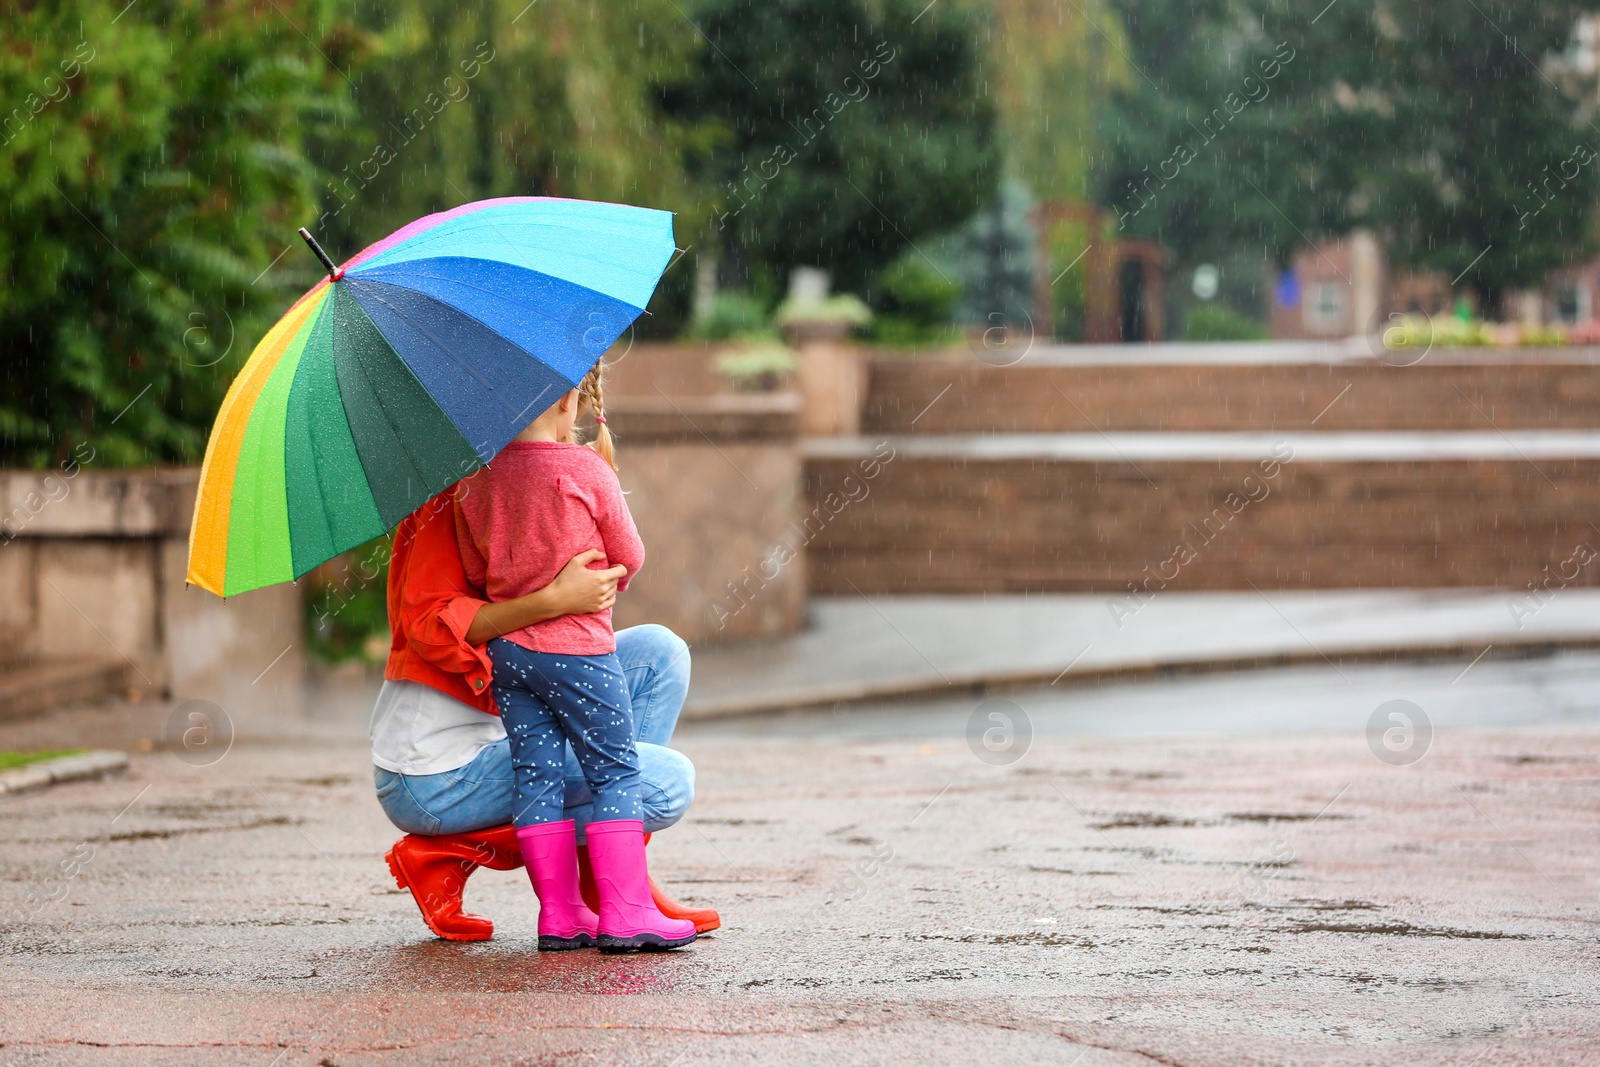 Photo of Mother and daughter with bright umbrella under rain outdoors